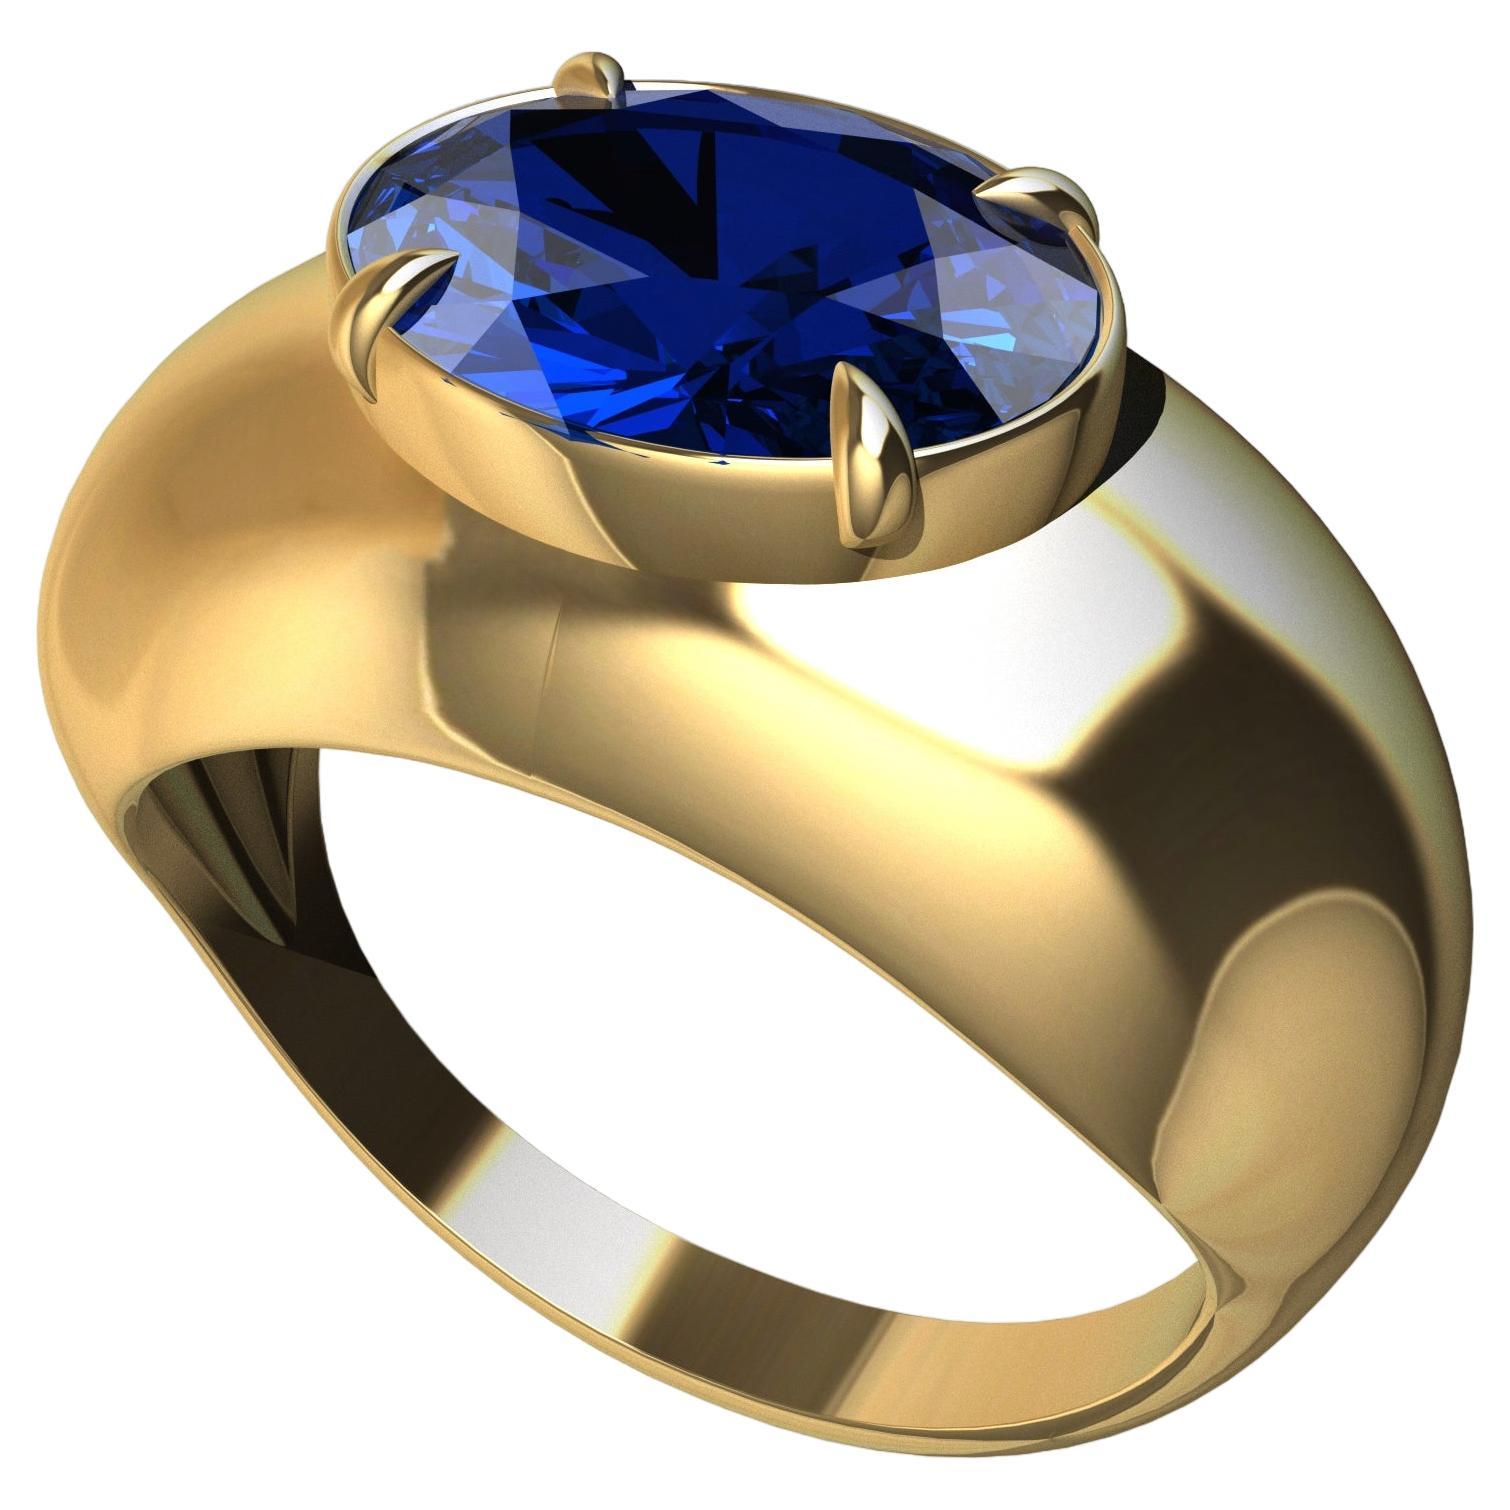 For Sale:  18 Karat Yellow Gold 3.15 Carat  Blue Sapphire Dome Ring